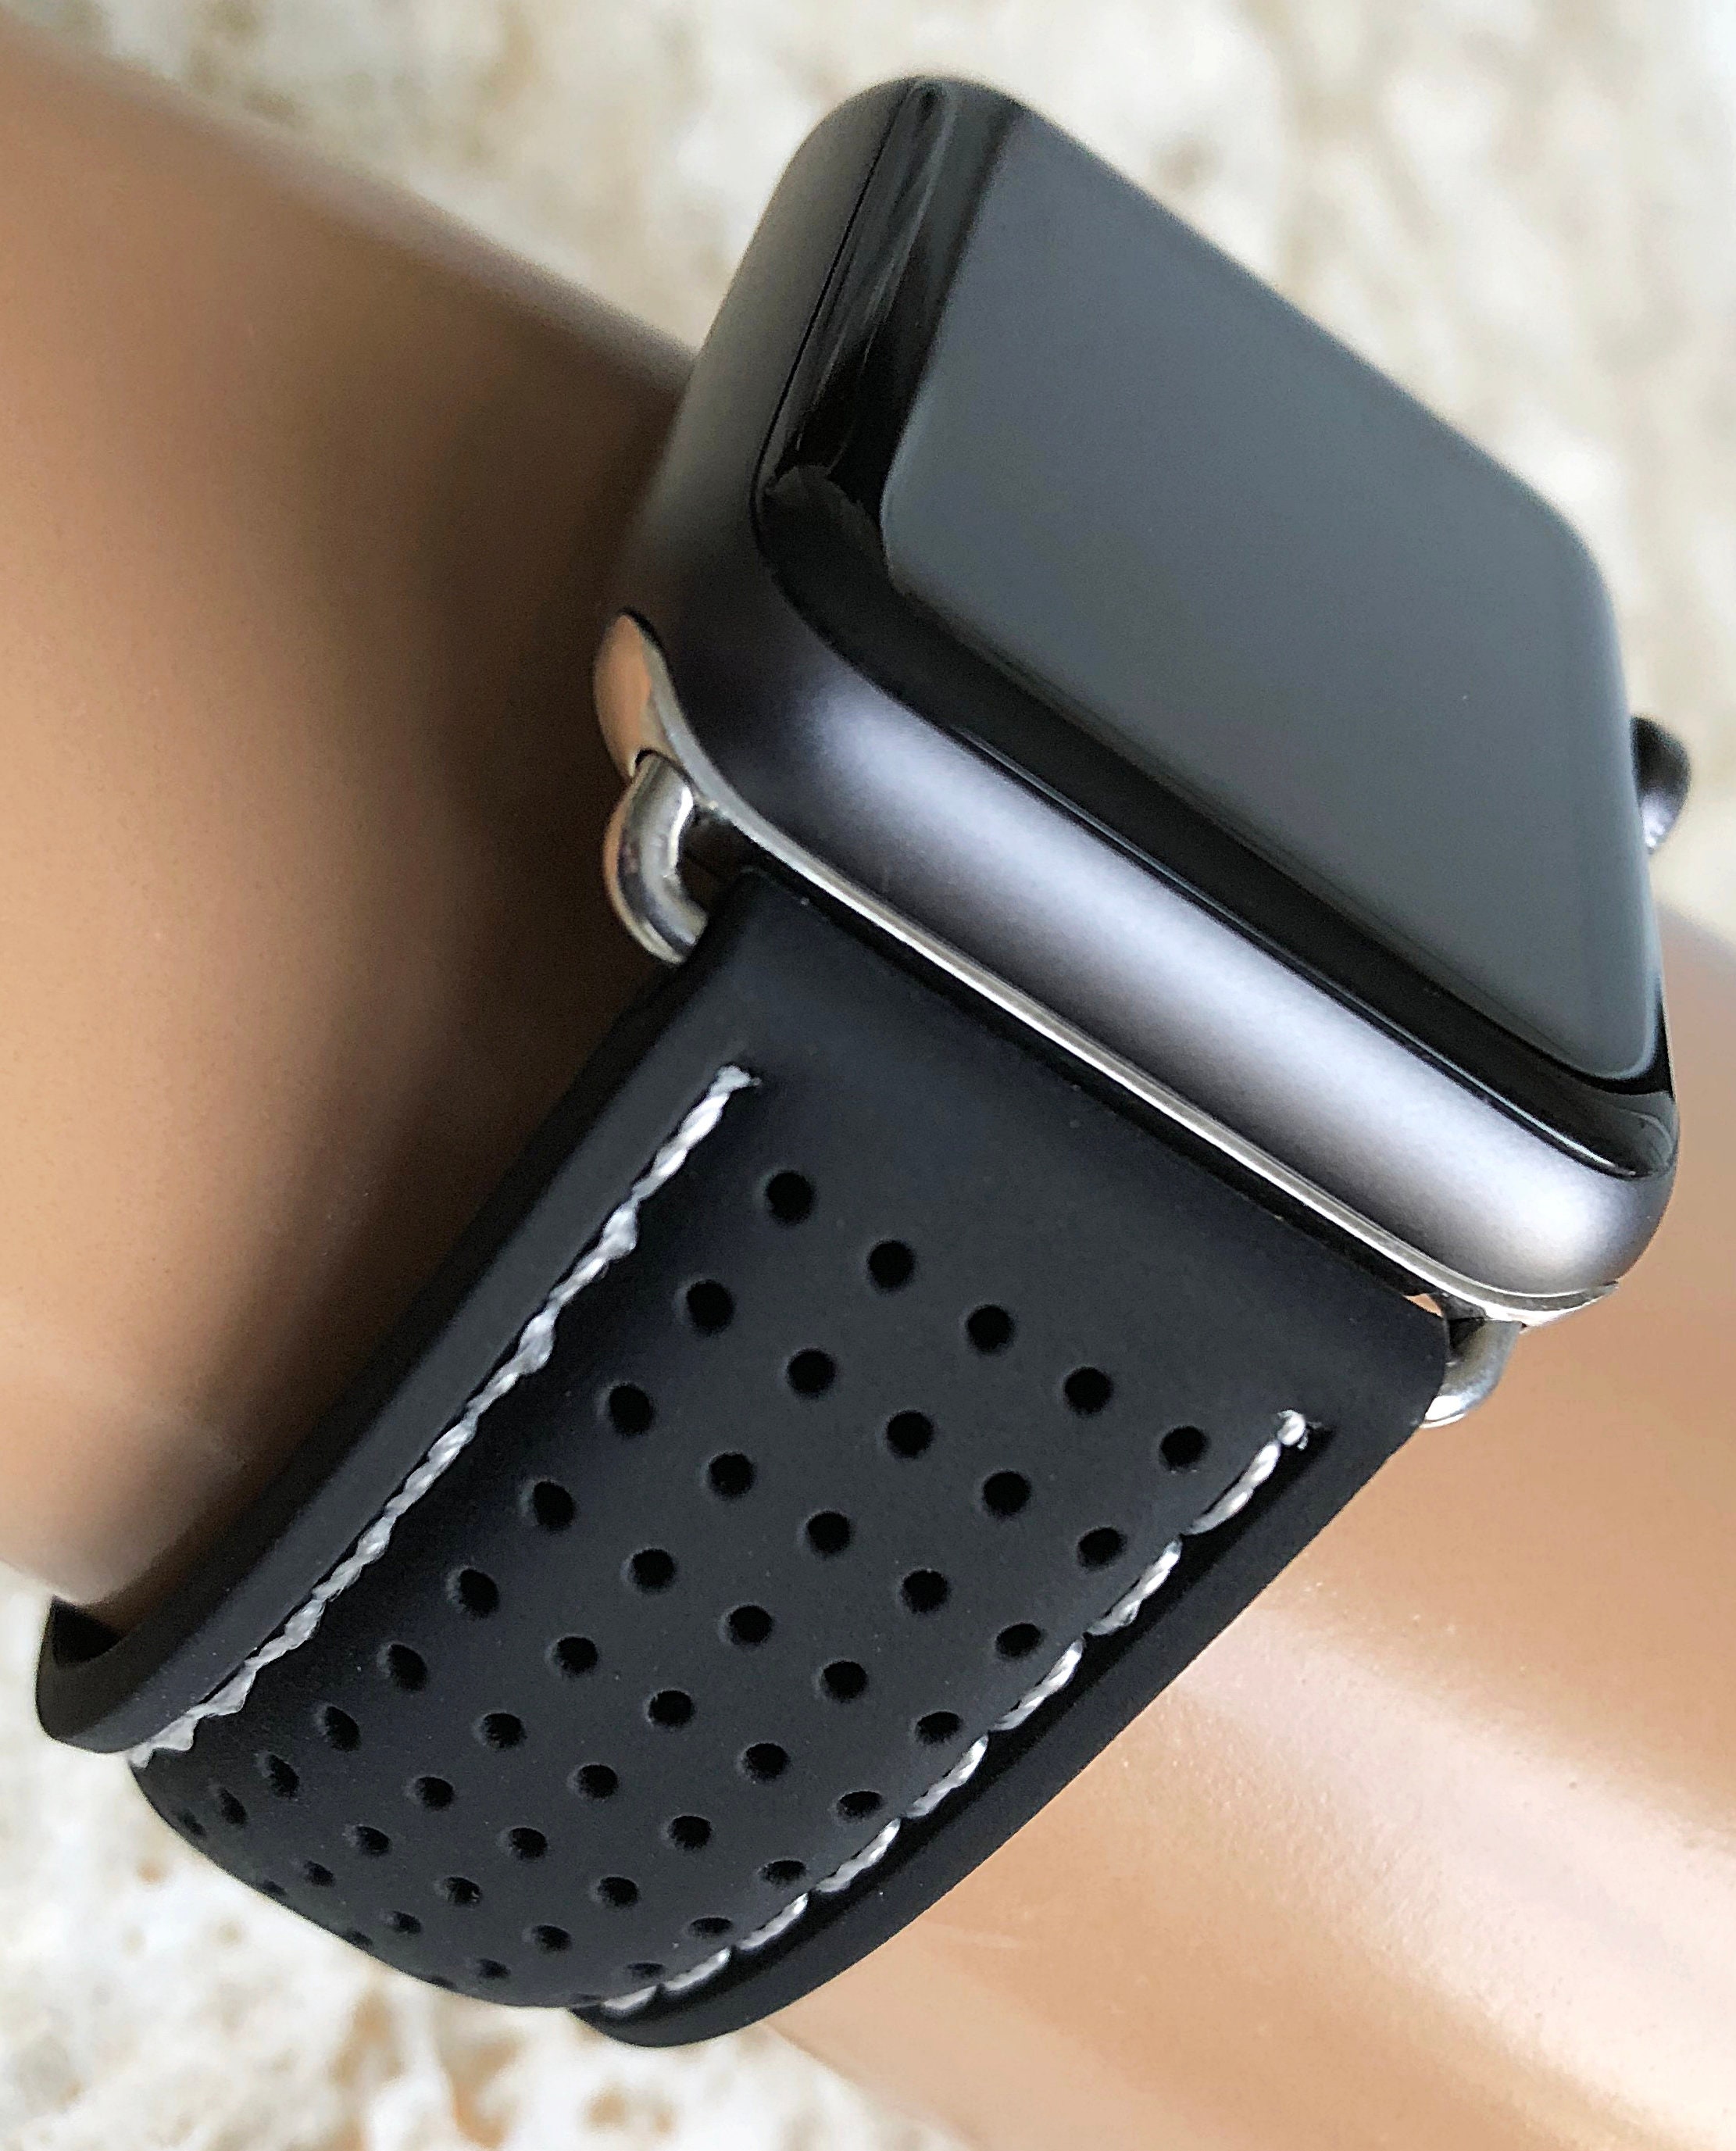 Luxury Apple Watch Band Flower Leather Watchs Strap Wristband For Iwatch 8  7 6 5 4 SE Designer Watchband From Wingscase, $22.49